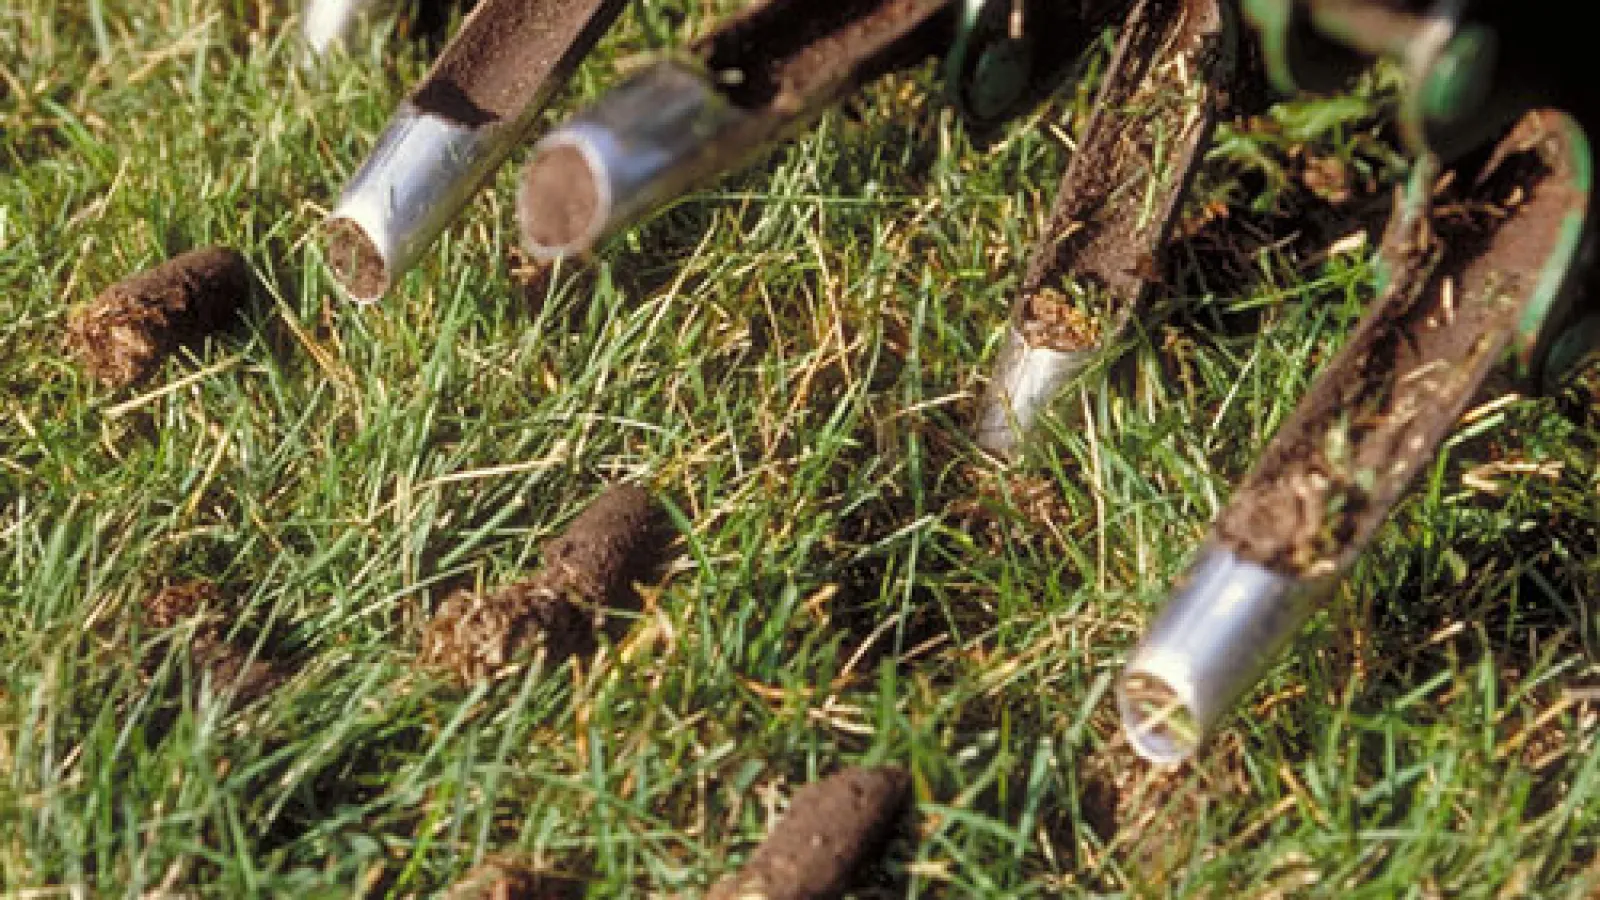 image of lawn aeration plugs